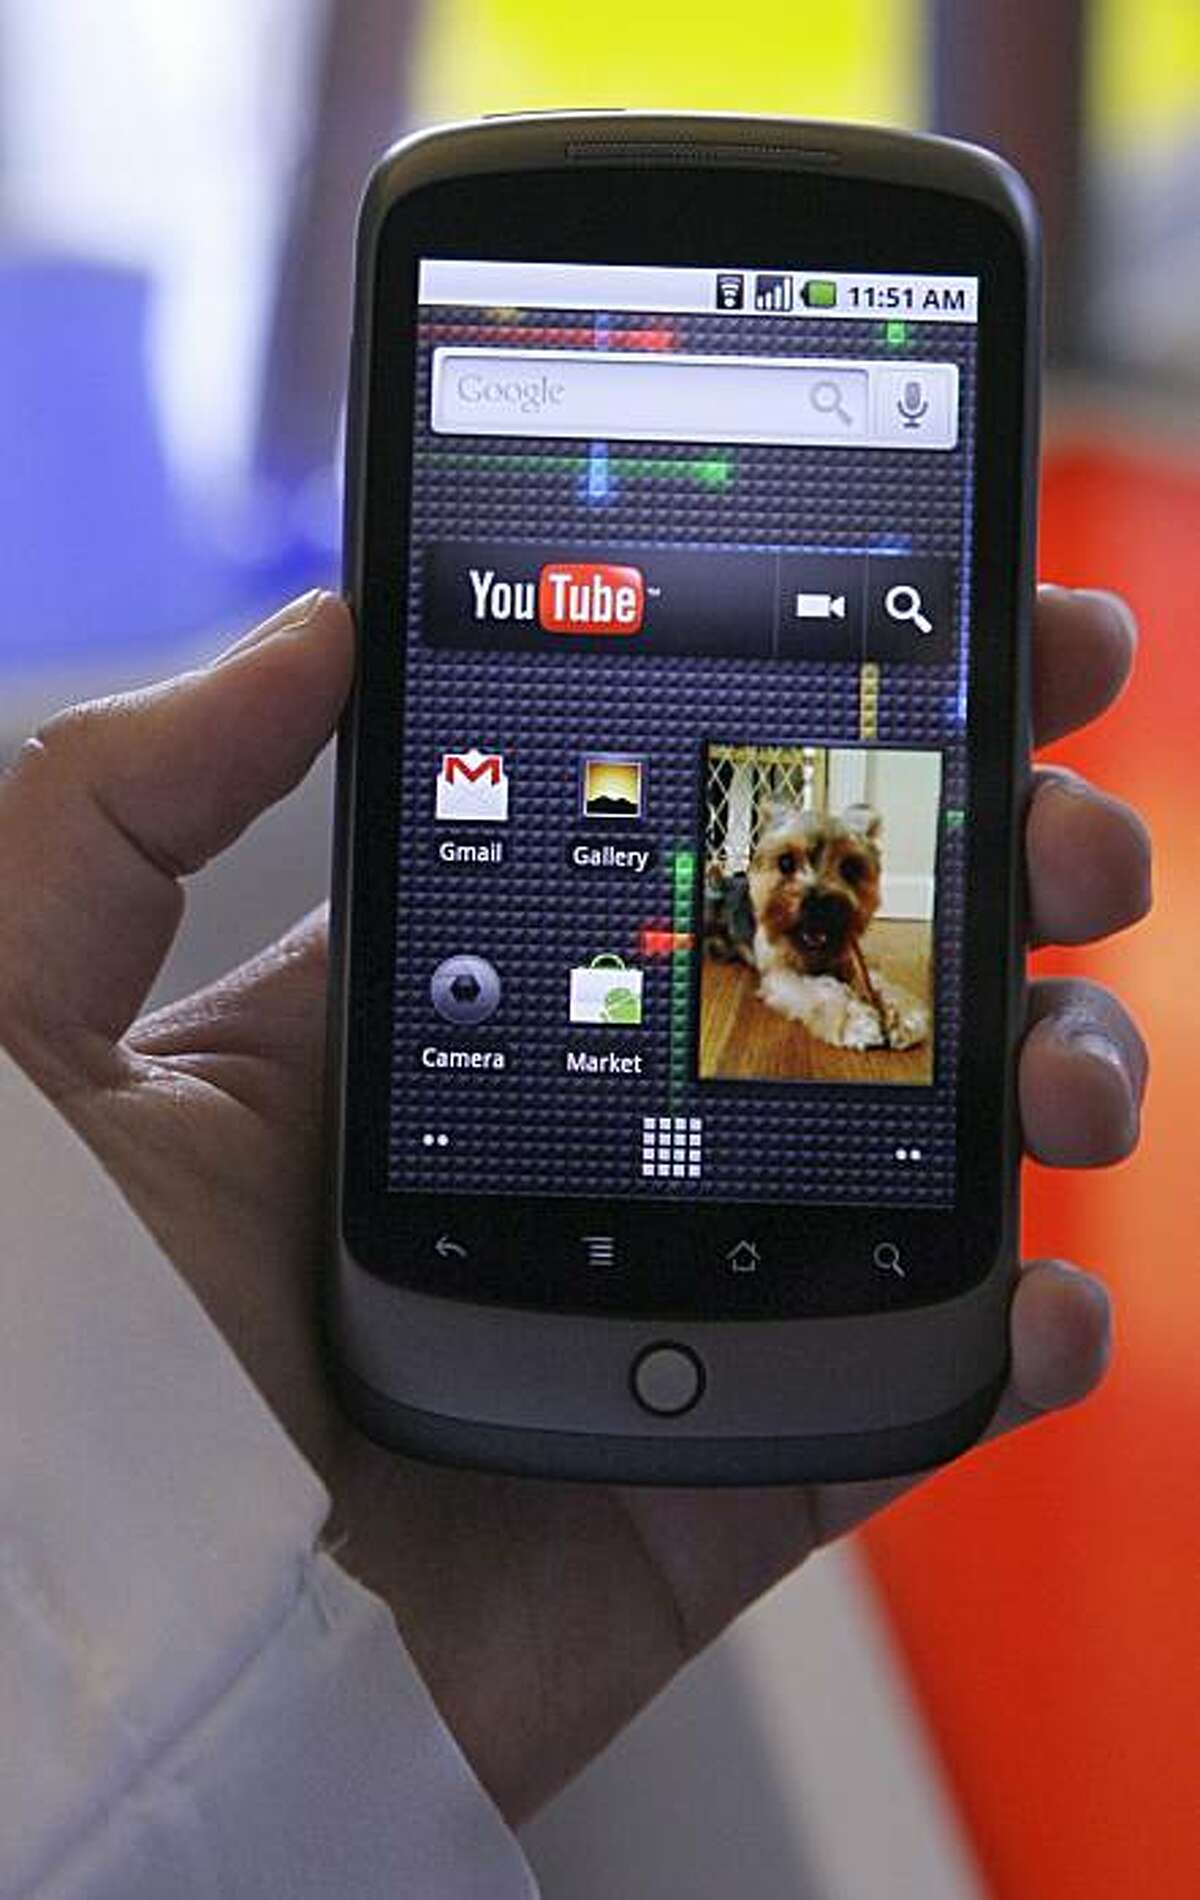 The Nexus One phone from Google Inc. is shown at a demo in Mountain View, Calif., Tuesday, Jan. 5, 2010. (AP Photo/Jeff Chiu)